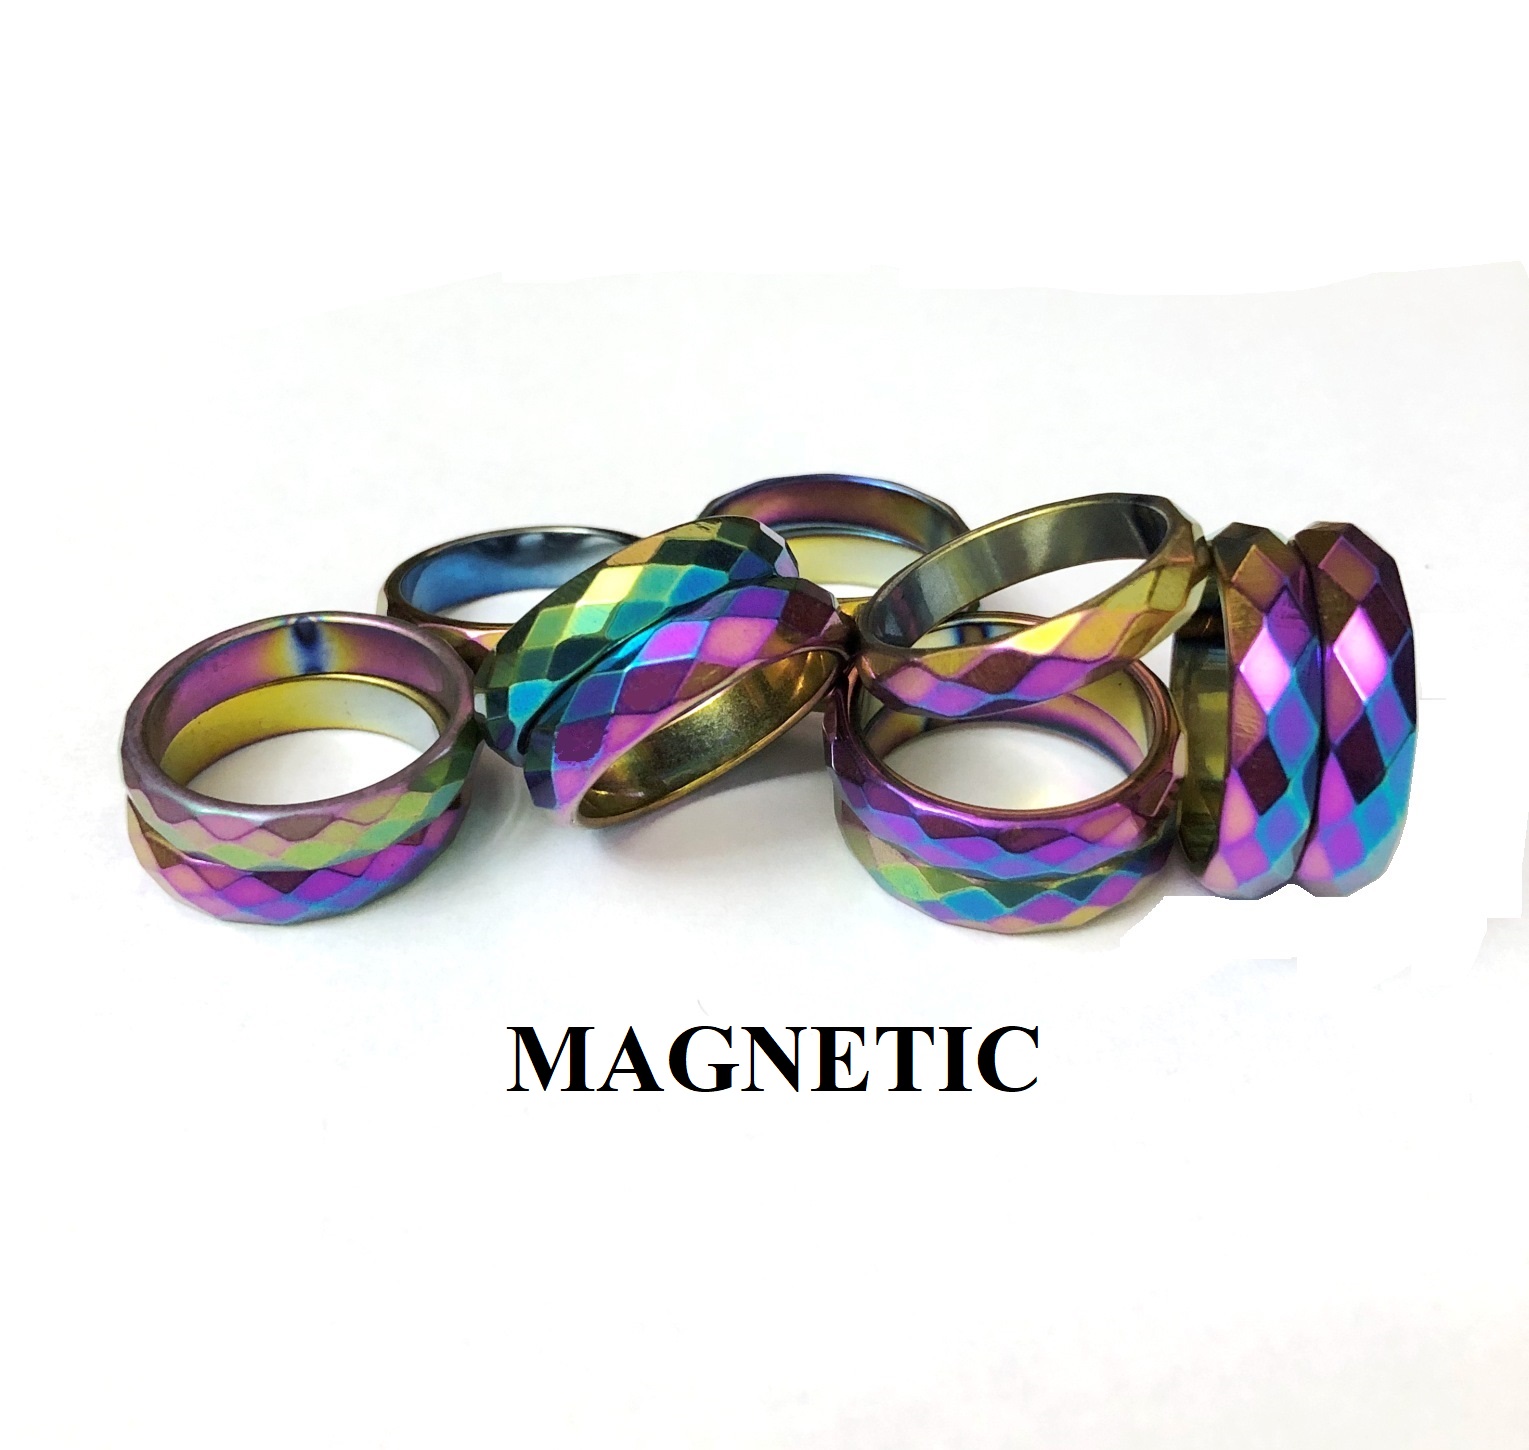 12 PC. MAGNETIC Faceted 6mm Diamond Cut Rainbow Hematite Rings Mixed Sizes #RR1654-812